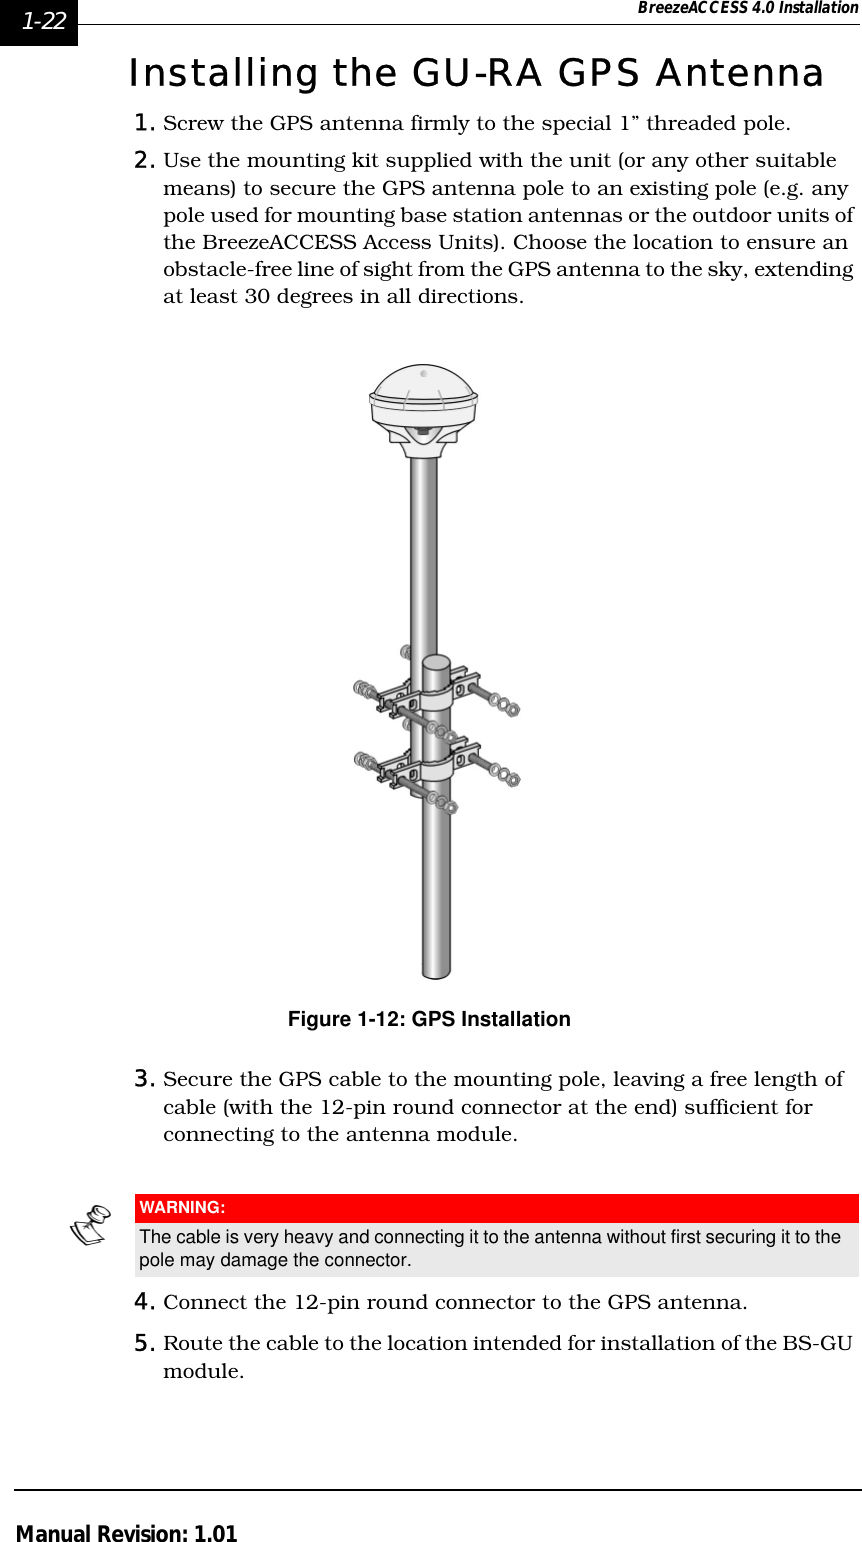 1-22 BreezeACCESS 4.0 InstallationManual Revision: 1.01Installing the GU-RA GPS Antenna1. Screw the GPS antenna firmly to the special 1” threaded pole.2. Use the mounting kit supplied with the unit (or any other suitable means) to secure the GPS antenna pole to an existing pole (e.g. any pole used for mounting base station antennas or the outdoor units of the BreezeACCESS Access Units). Choose the location to ensure an obstacle-free line of sight from the GPS antenna to the sky, extending at least 30 degrees in all directions.Figure 1-12: GPS Installation3. Secure the GPS cable to the mounting pole, leaving a free length of cable (with the 12-pin round connector at the end) sufficient for connecting to the antenna module. 4. Connect the 12-pin round connector to the GPS antenna.5. Route the cable to the location intended for installation of the BS-GU module.WARNING:The cable is very heavy and connecting it to the antenna without first securing it to the pole may damage the connector.